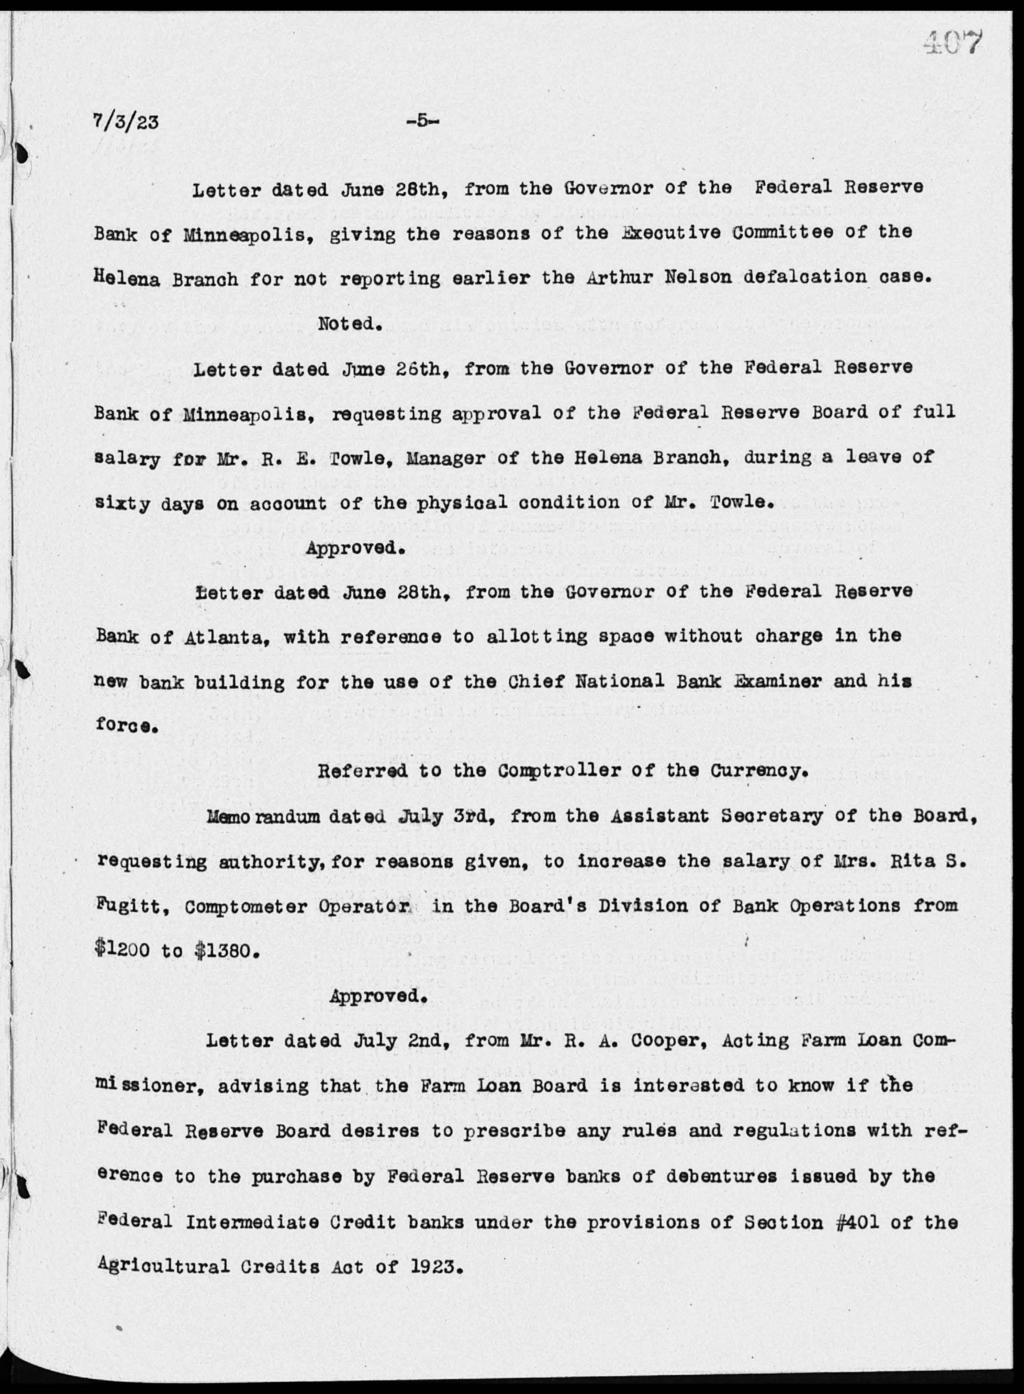 7/3/23-5- Letter dated Jane 28th, from the Governor of the Federal Reserve Bank of Minneapolis, giving the reasons of the Executive Committee of the Helena Branch for not reporting earlier the Arthur